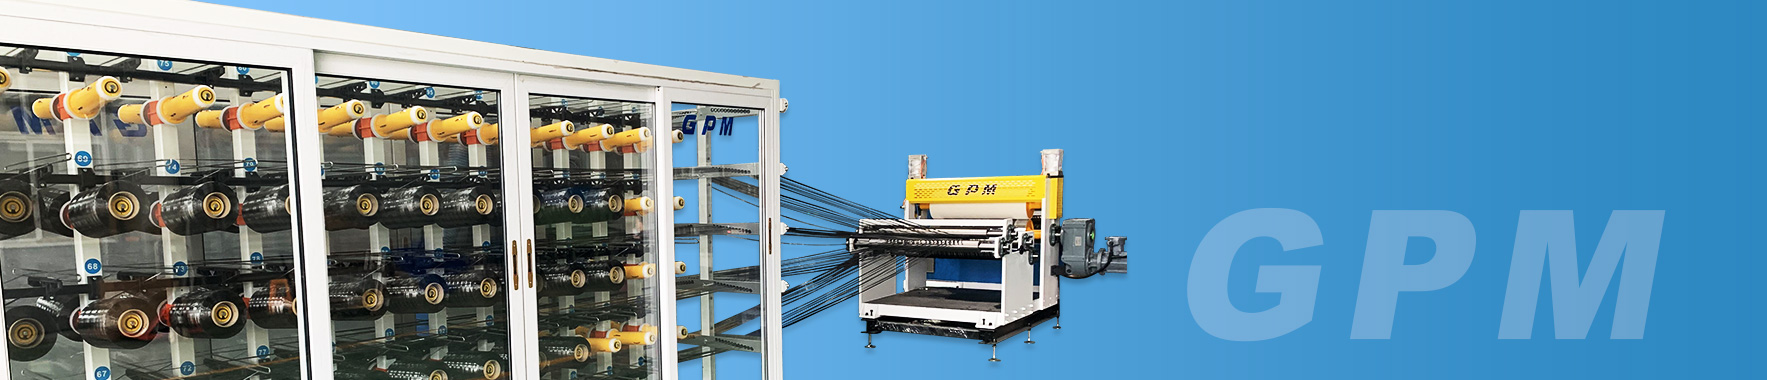 1270mm PP/PE/PA+Continuous Glass Fiber Reinforced Thermoplastic Prepreg UD-Tape Production Line(CFRT UD Tape)